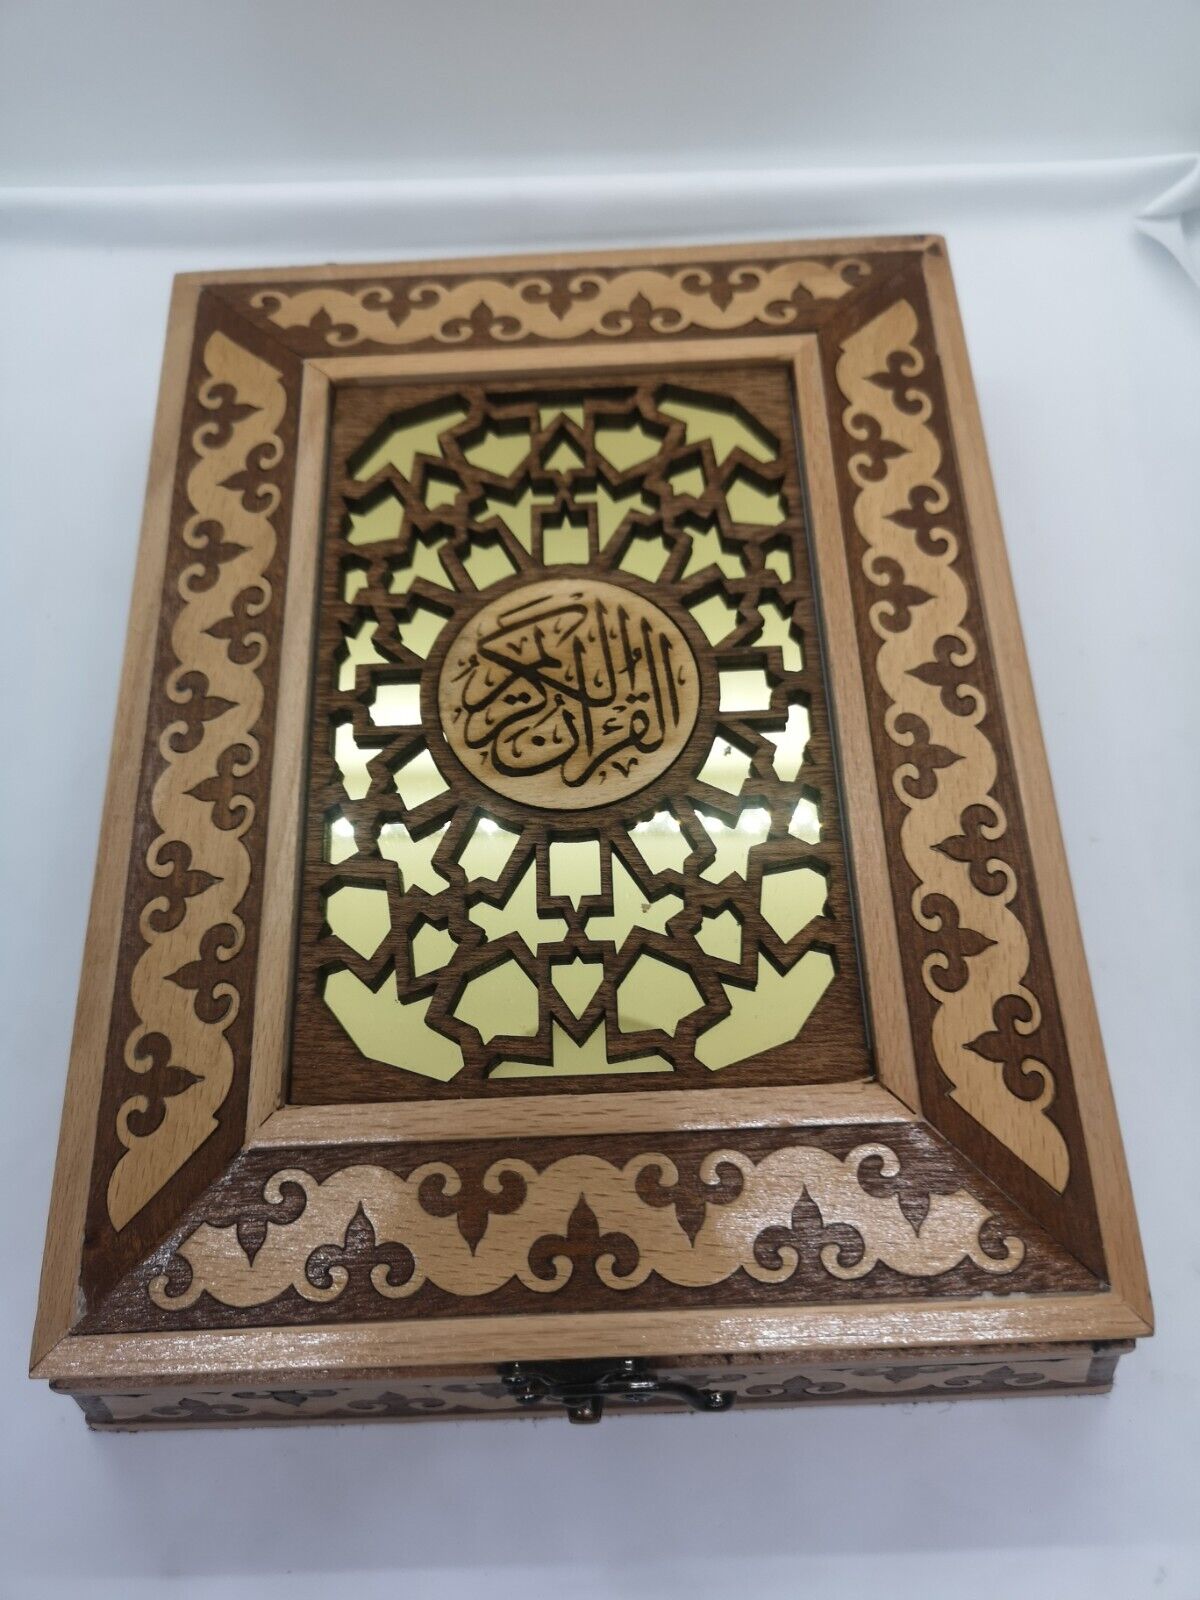 Quran Islamic Religion Islam Etched Box Wood Wooden Handmade Crafted Home Decor